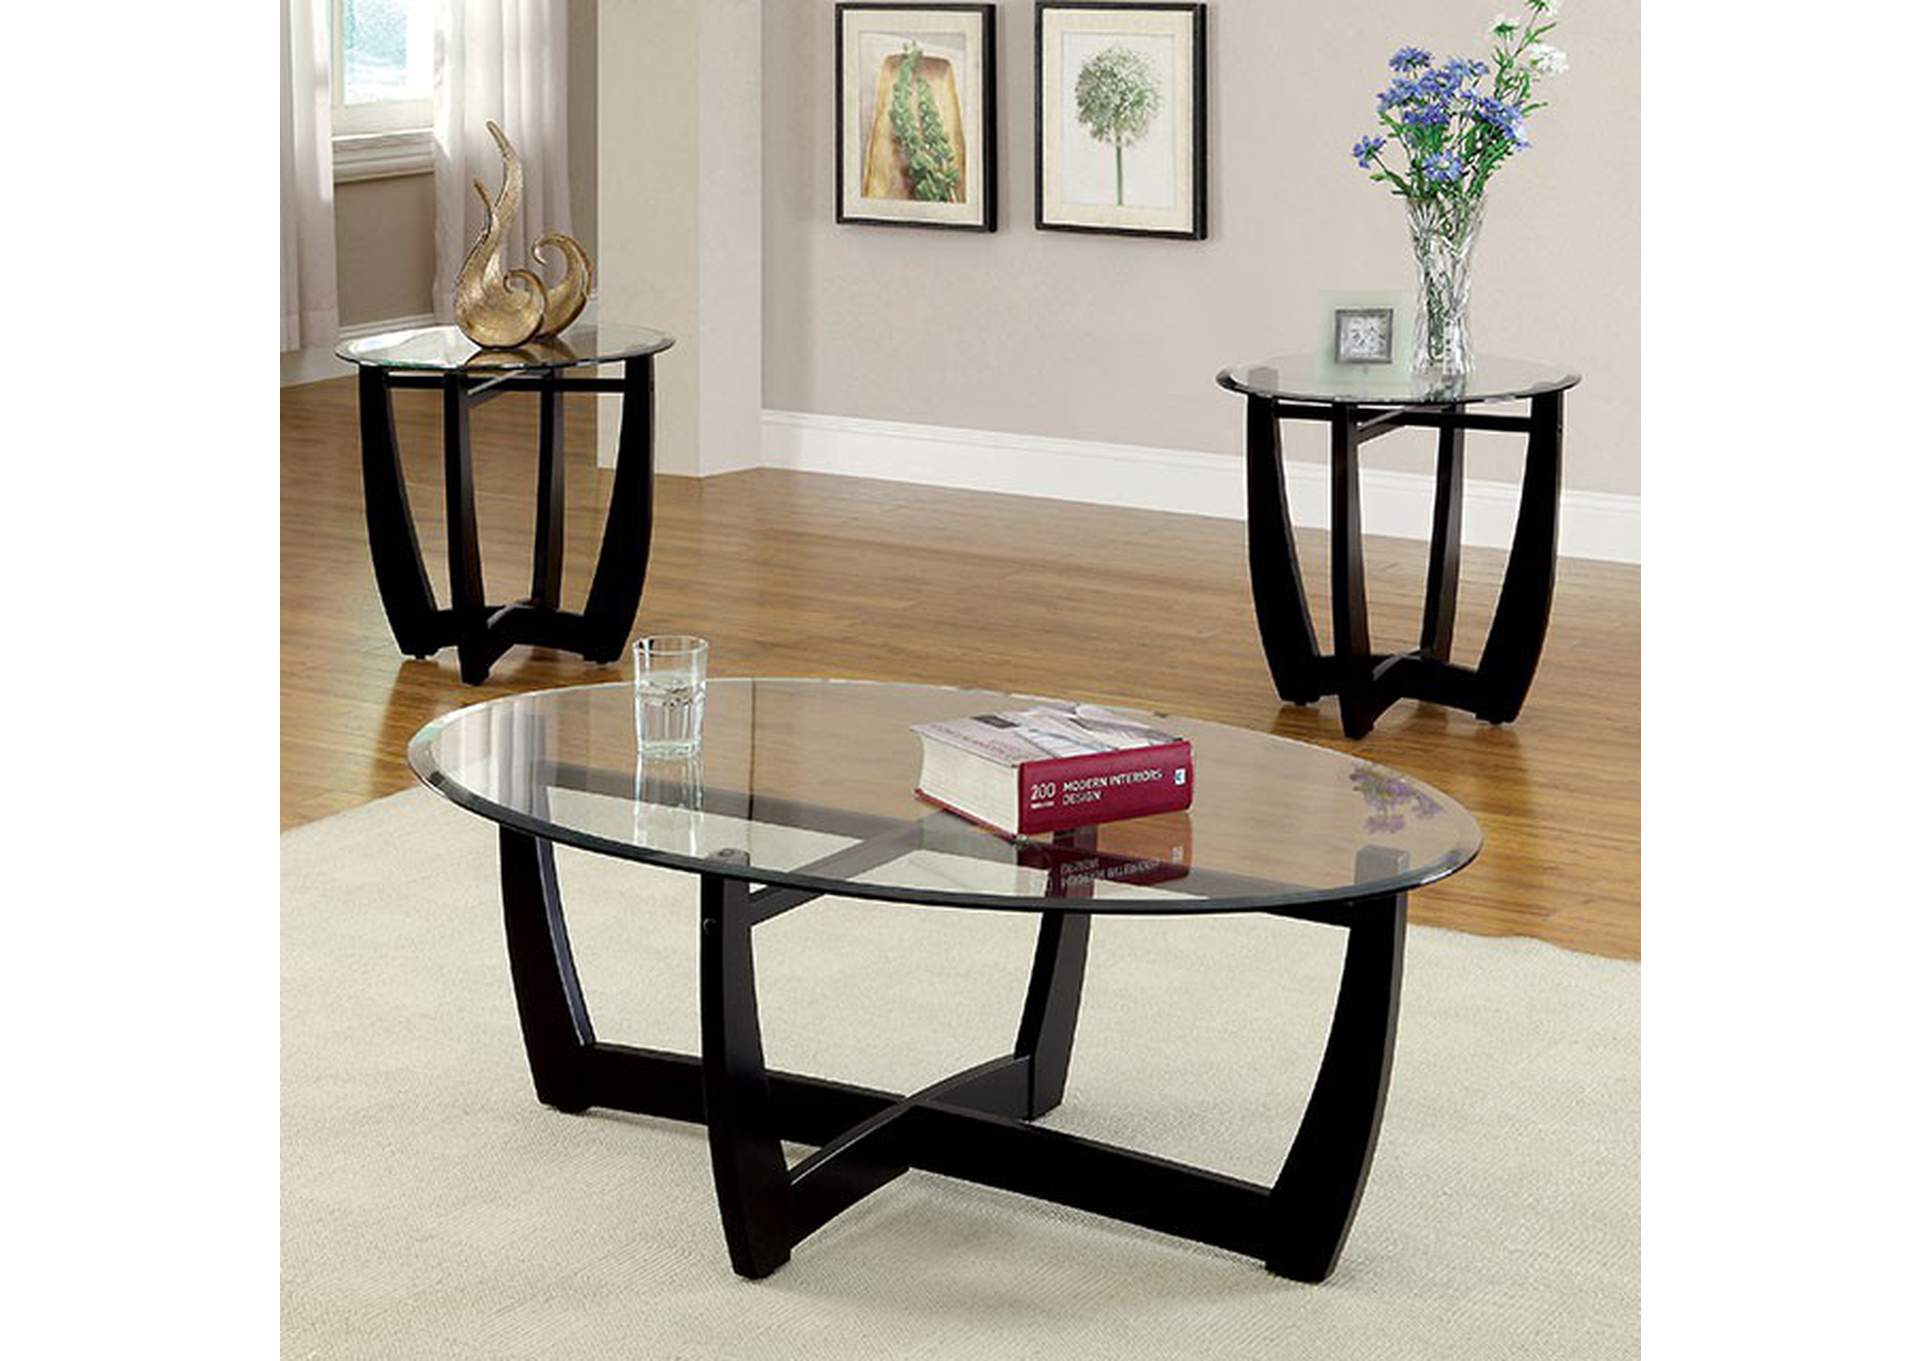 Dafni 3 Piece Black Tempered Table Set W Modern Style Legs Coffee 2 End Tables Best Buy Furniture And Mattress